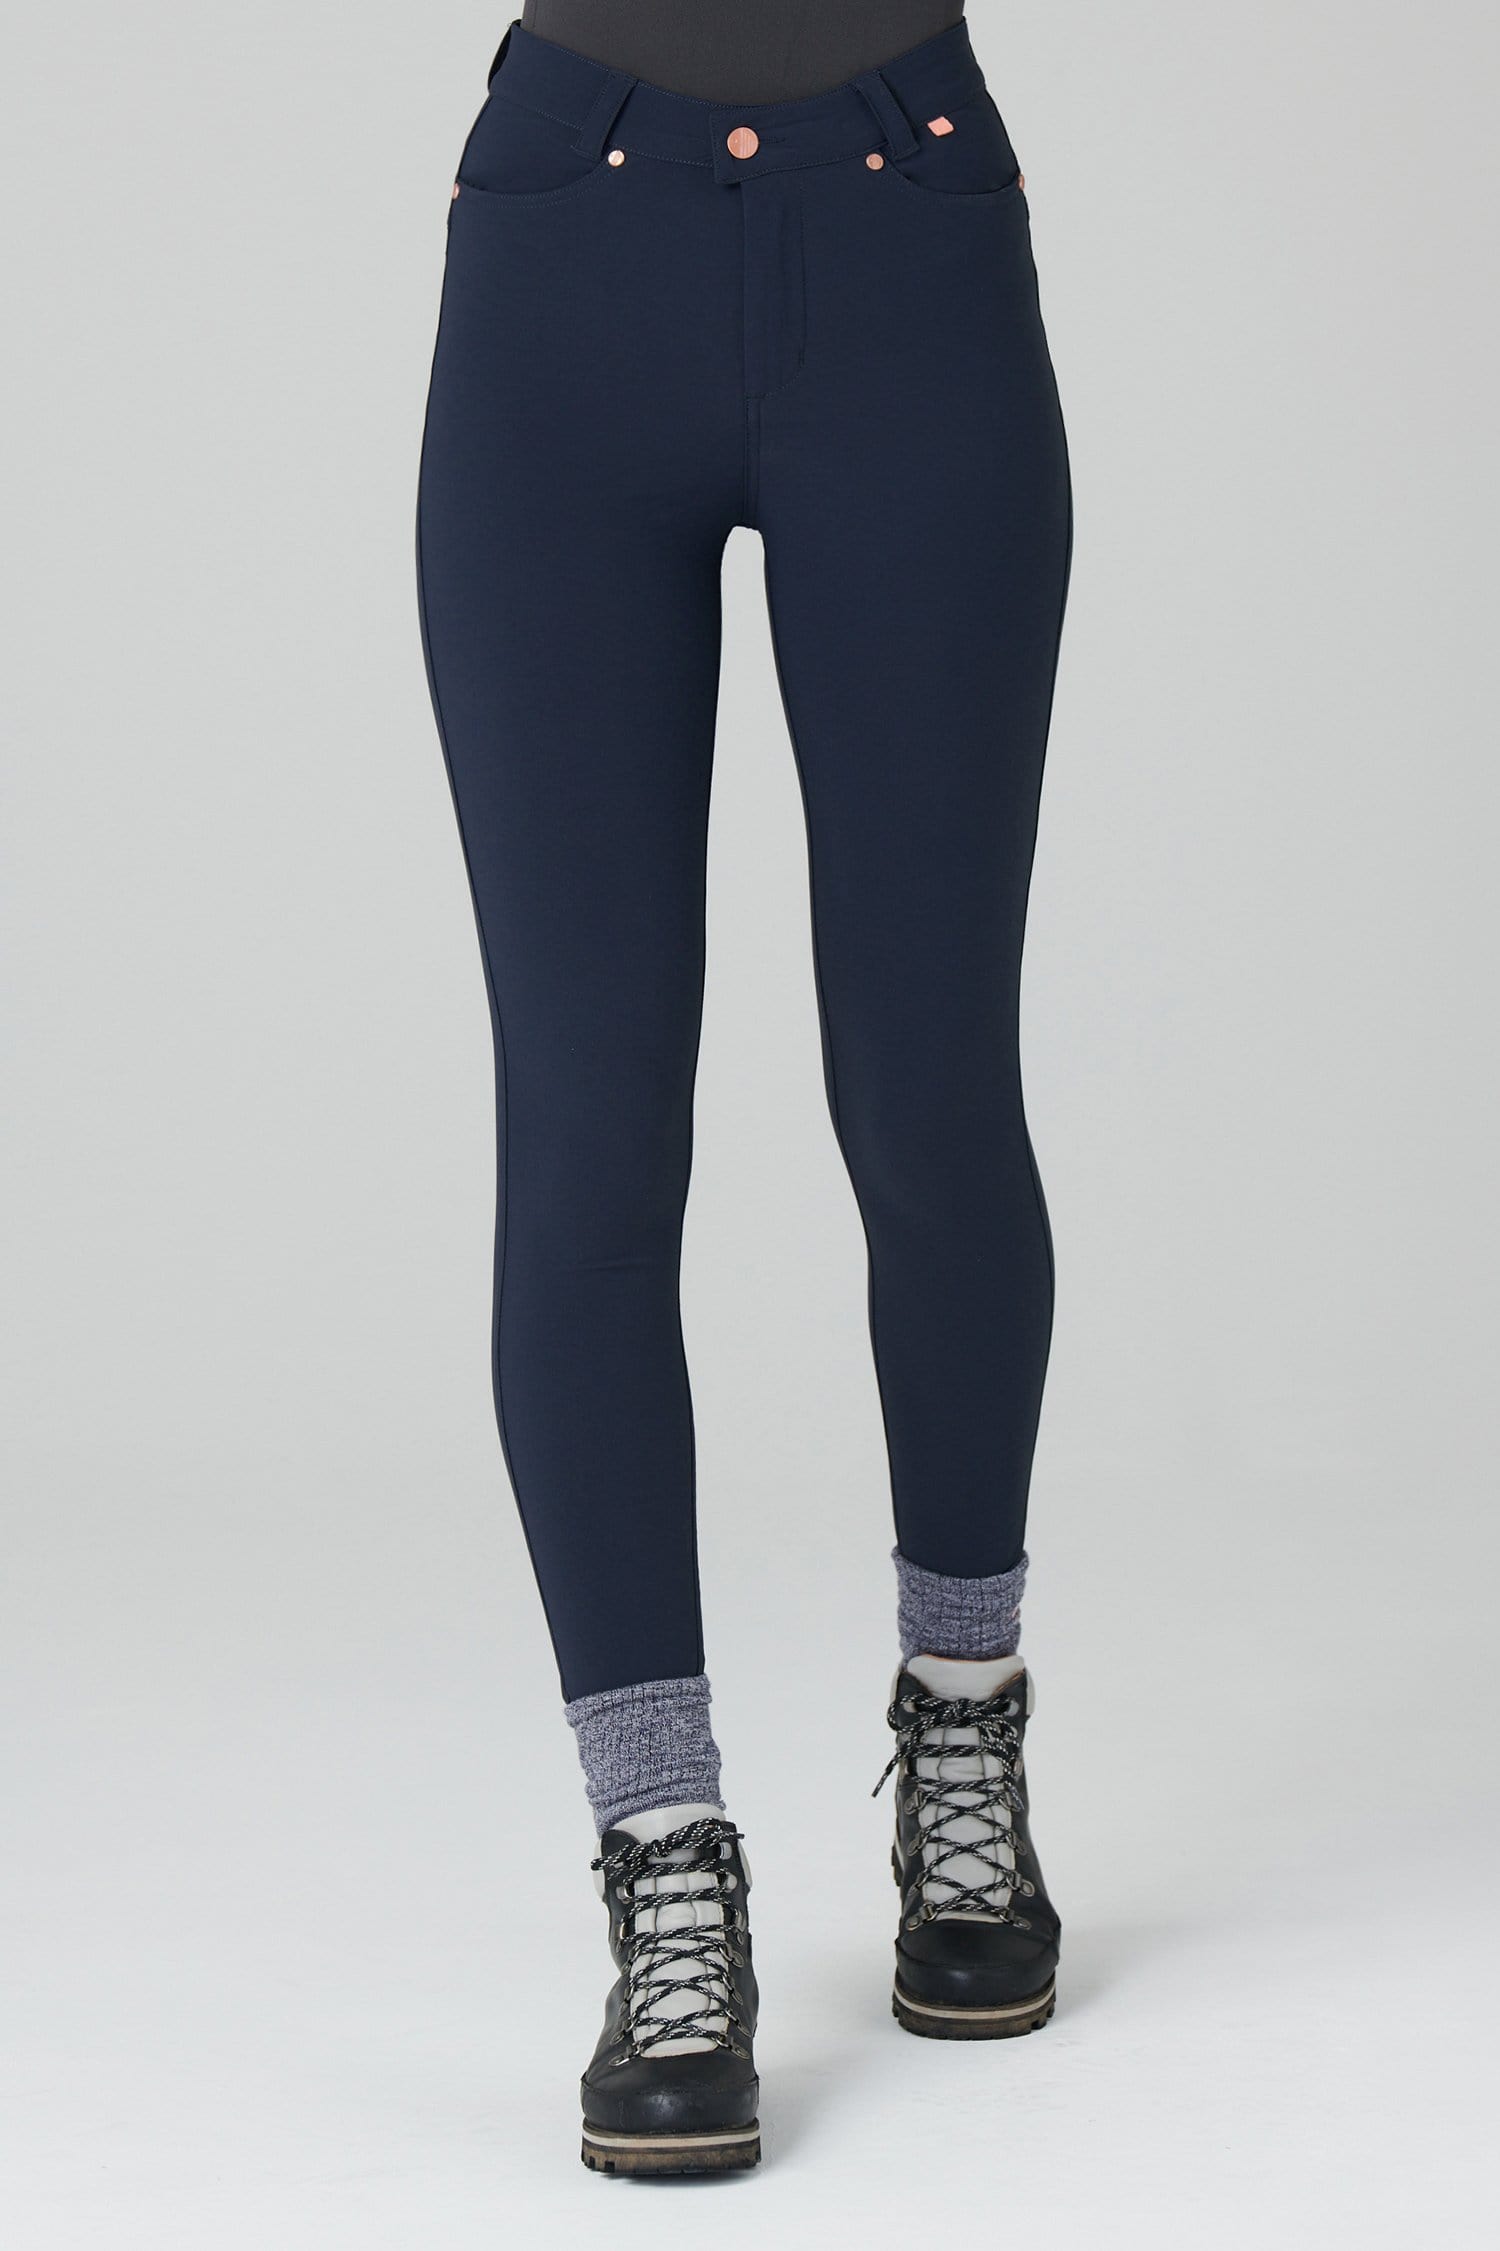 Thermal Skinny Outdoor Trousers - Deep Navy - 24r / Uk6 - Womens - Acai Outdoorwear